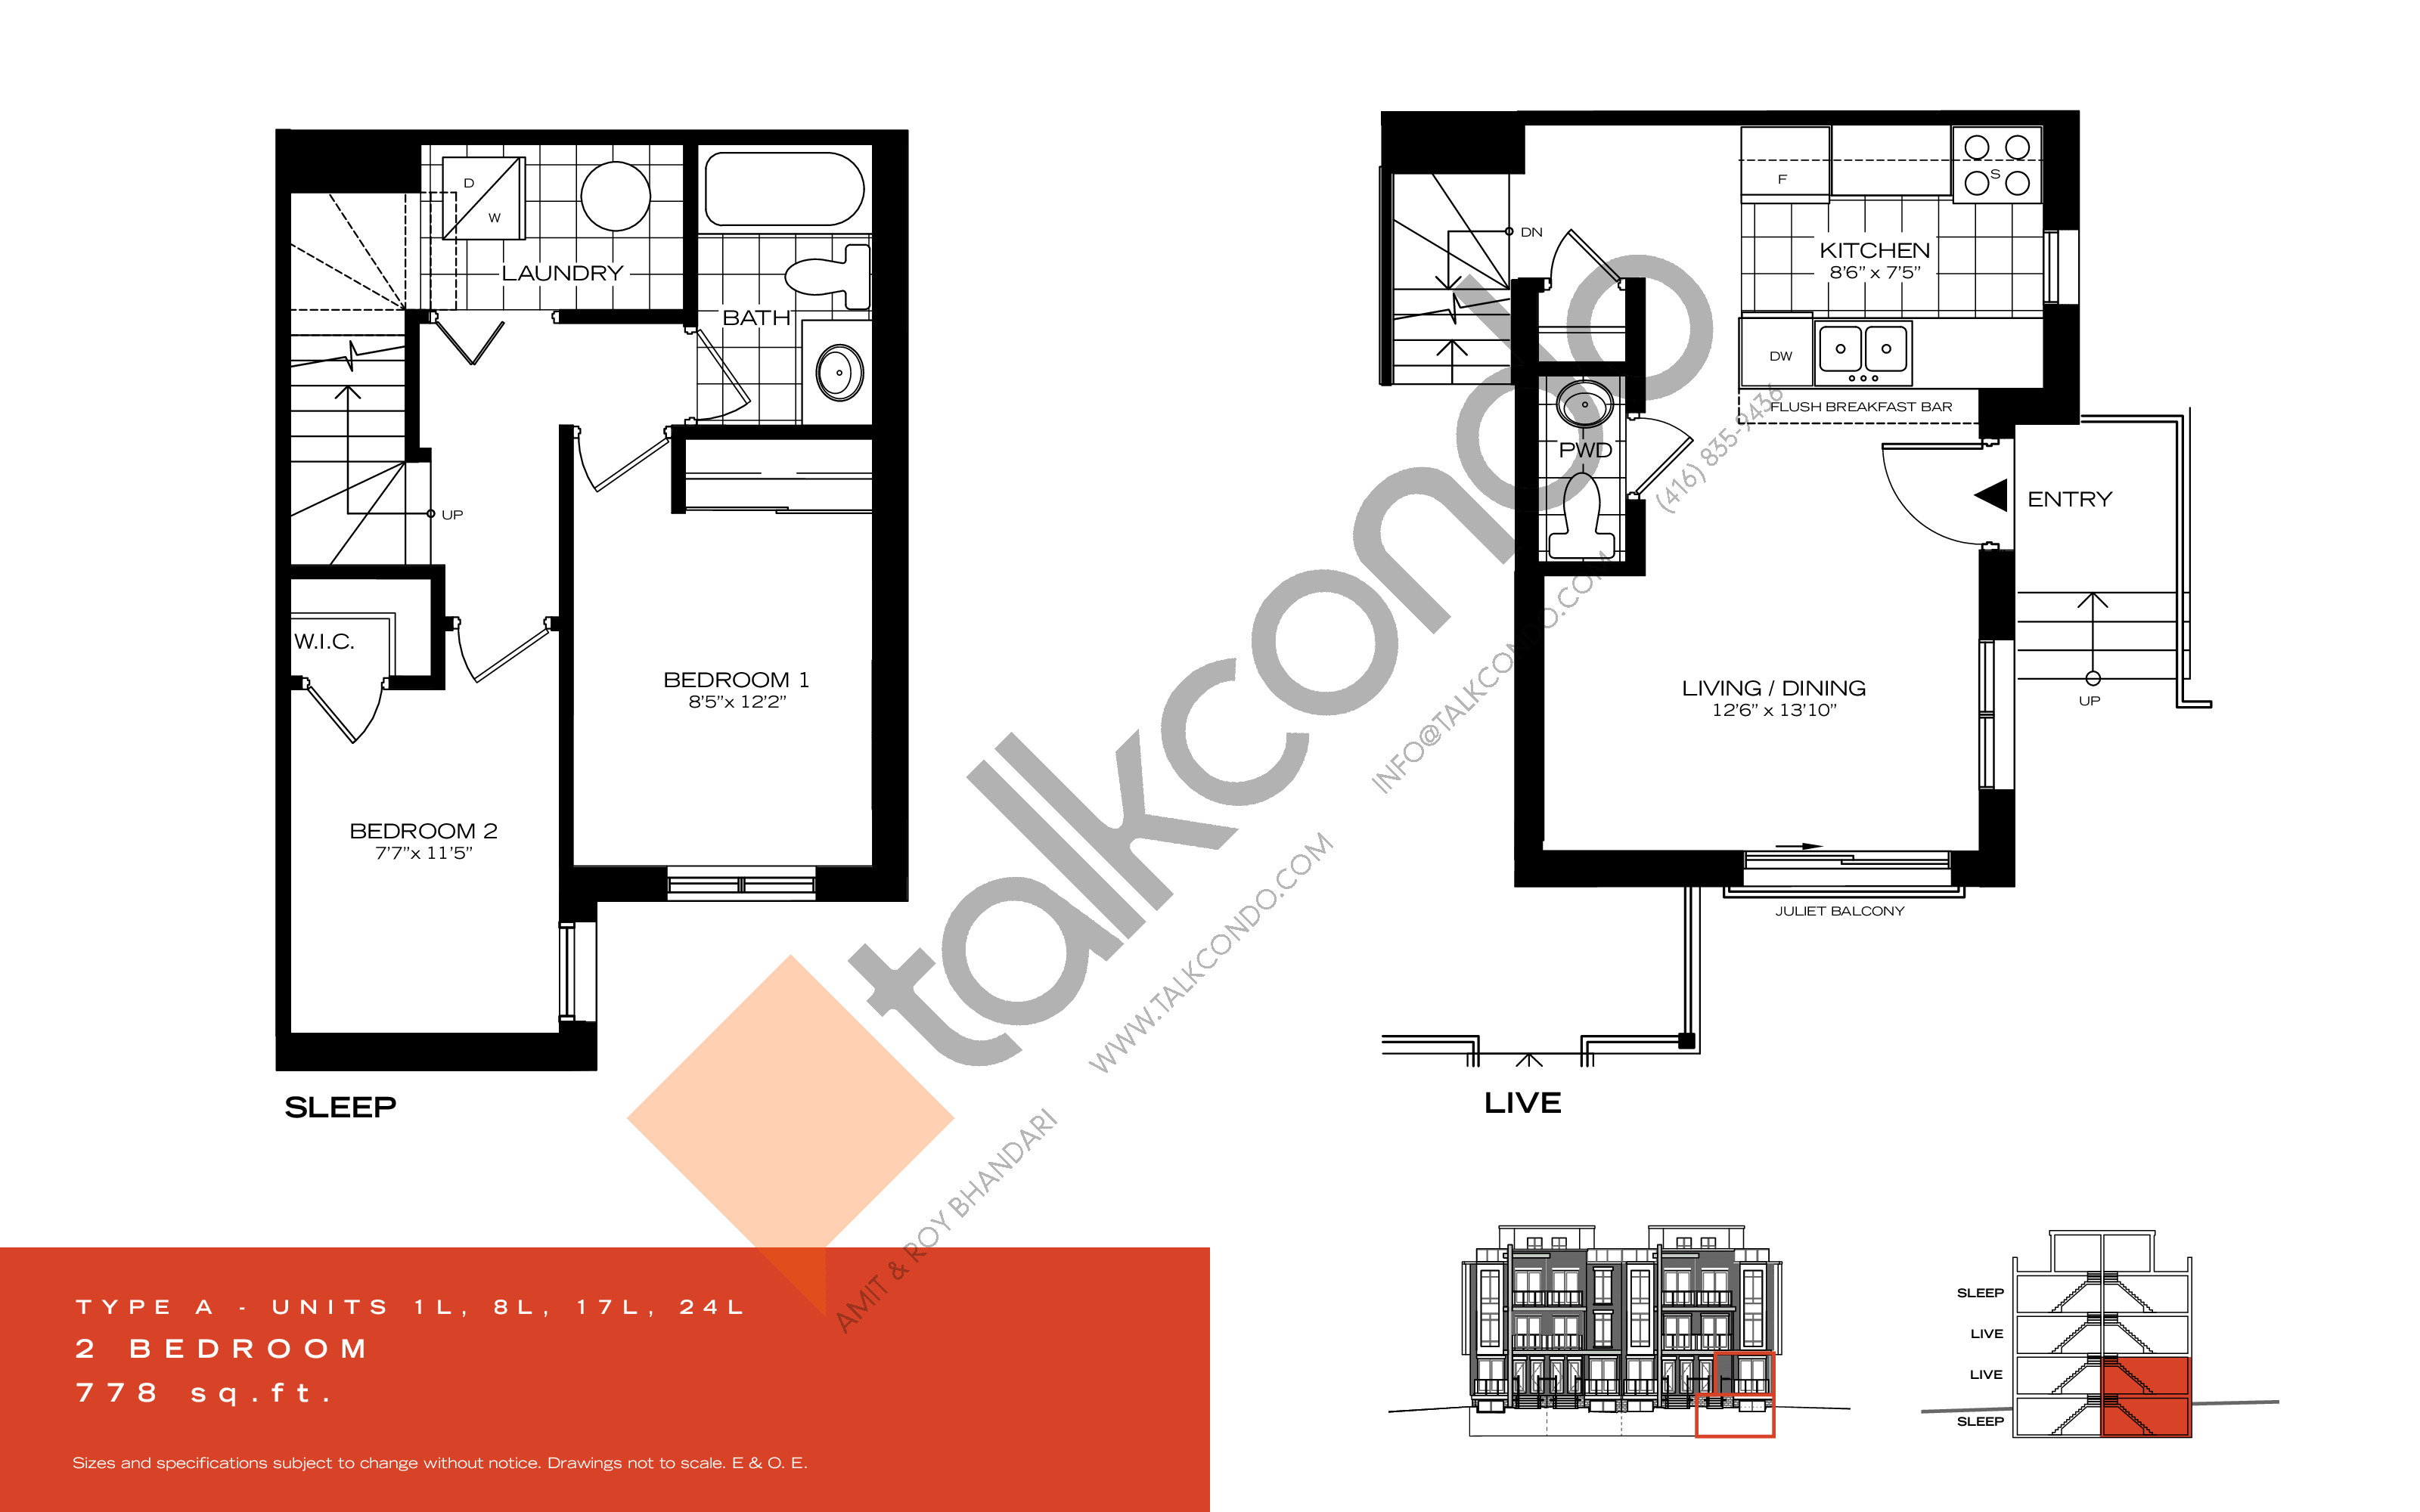 Midtowns On The Subway Type A 778 sq.ft. 2 bedrooms